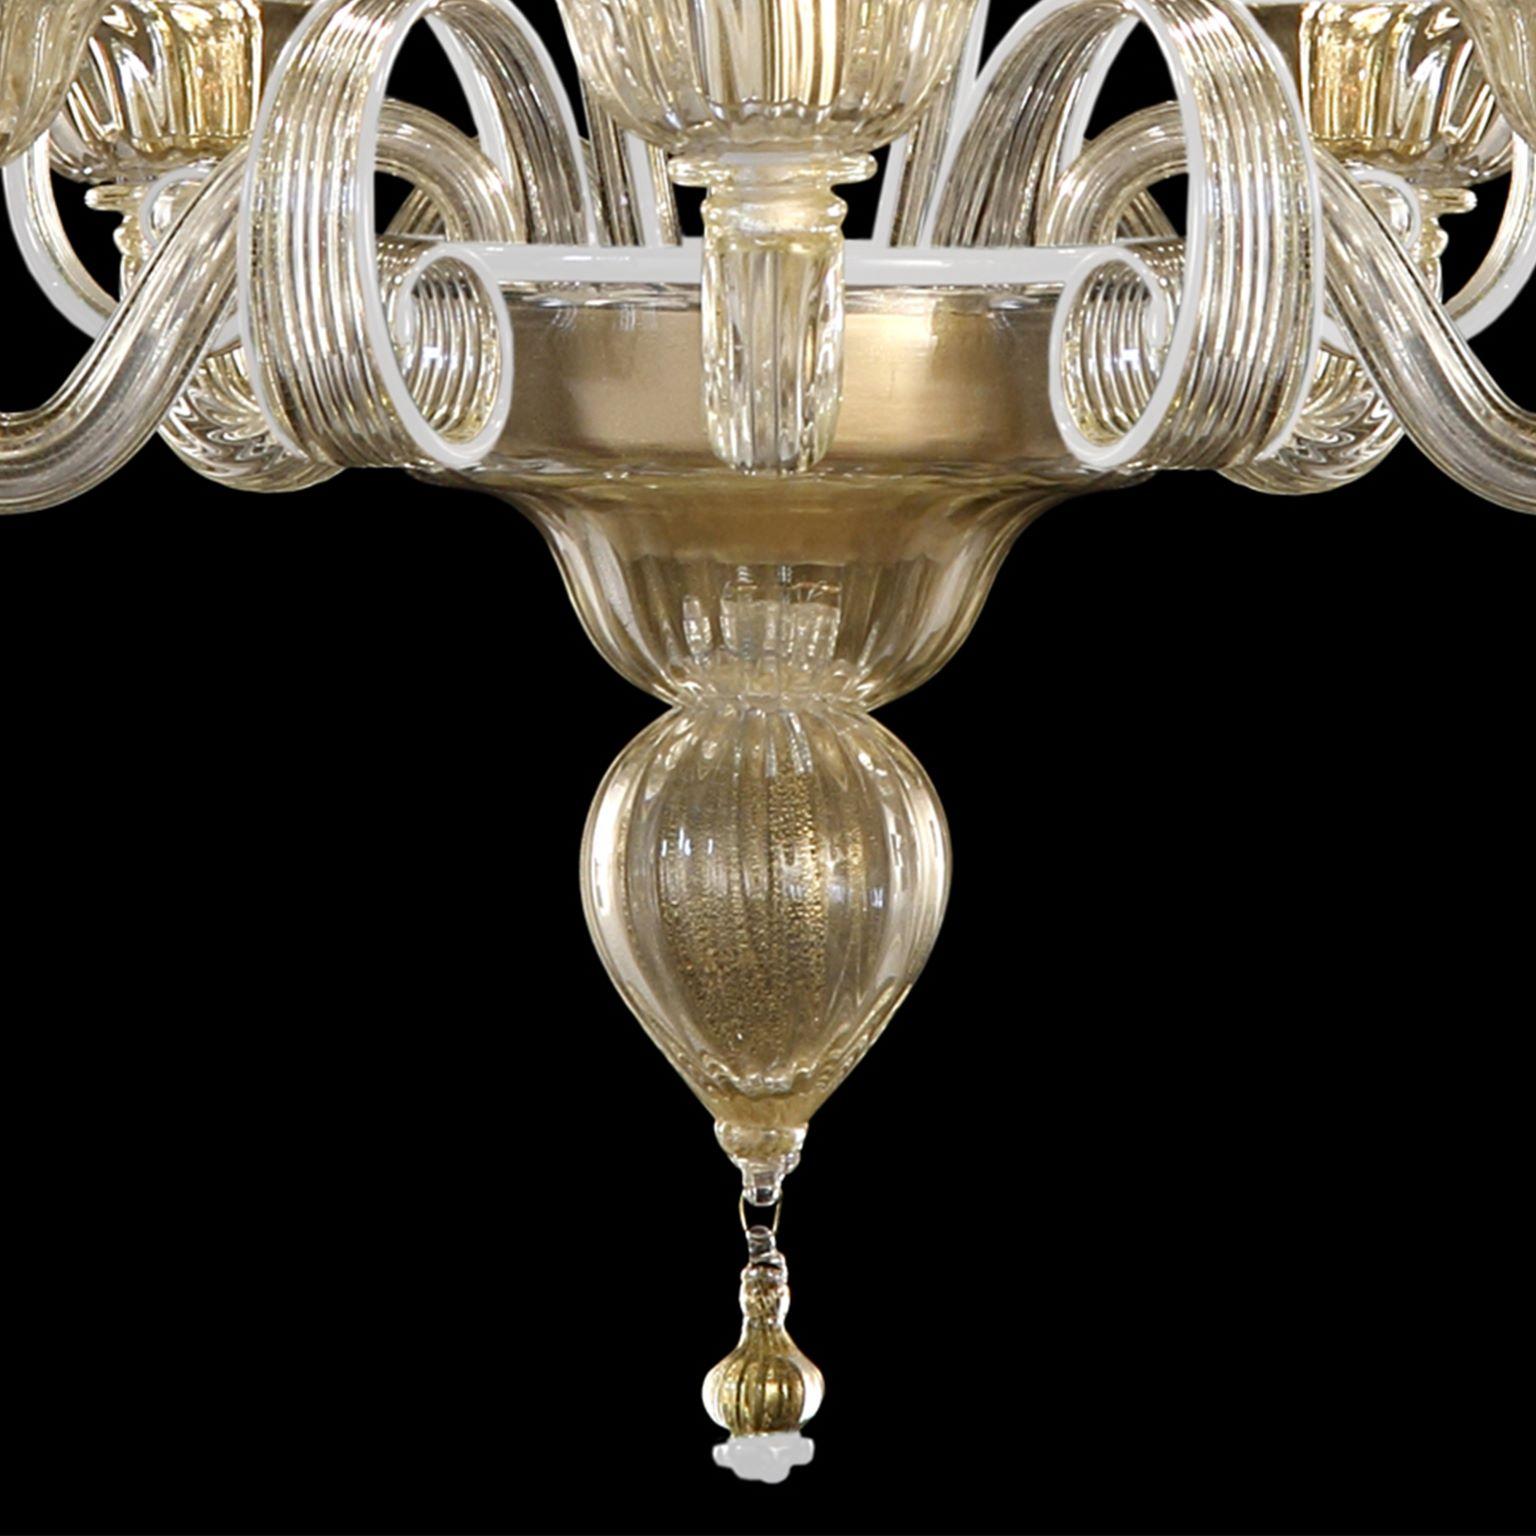 Other Chandelier 5 Arms Golden Leaf Artistic Murano Glass White Details by Multiforme For Sale